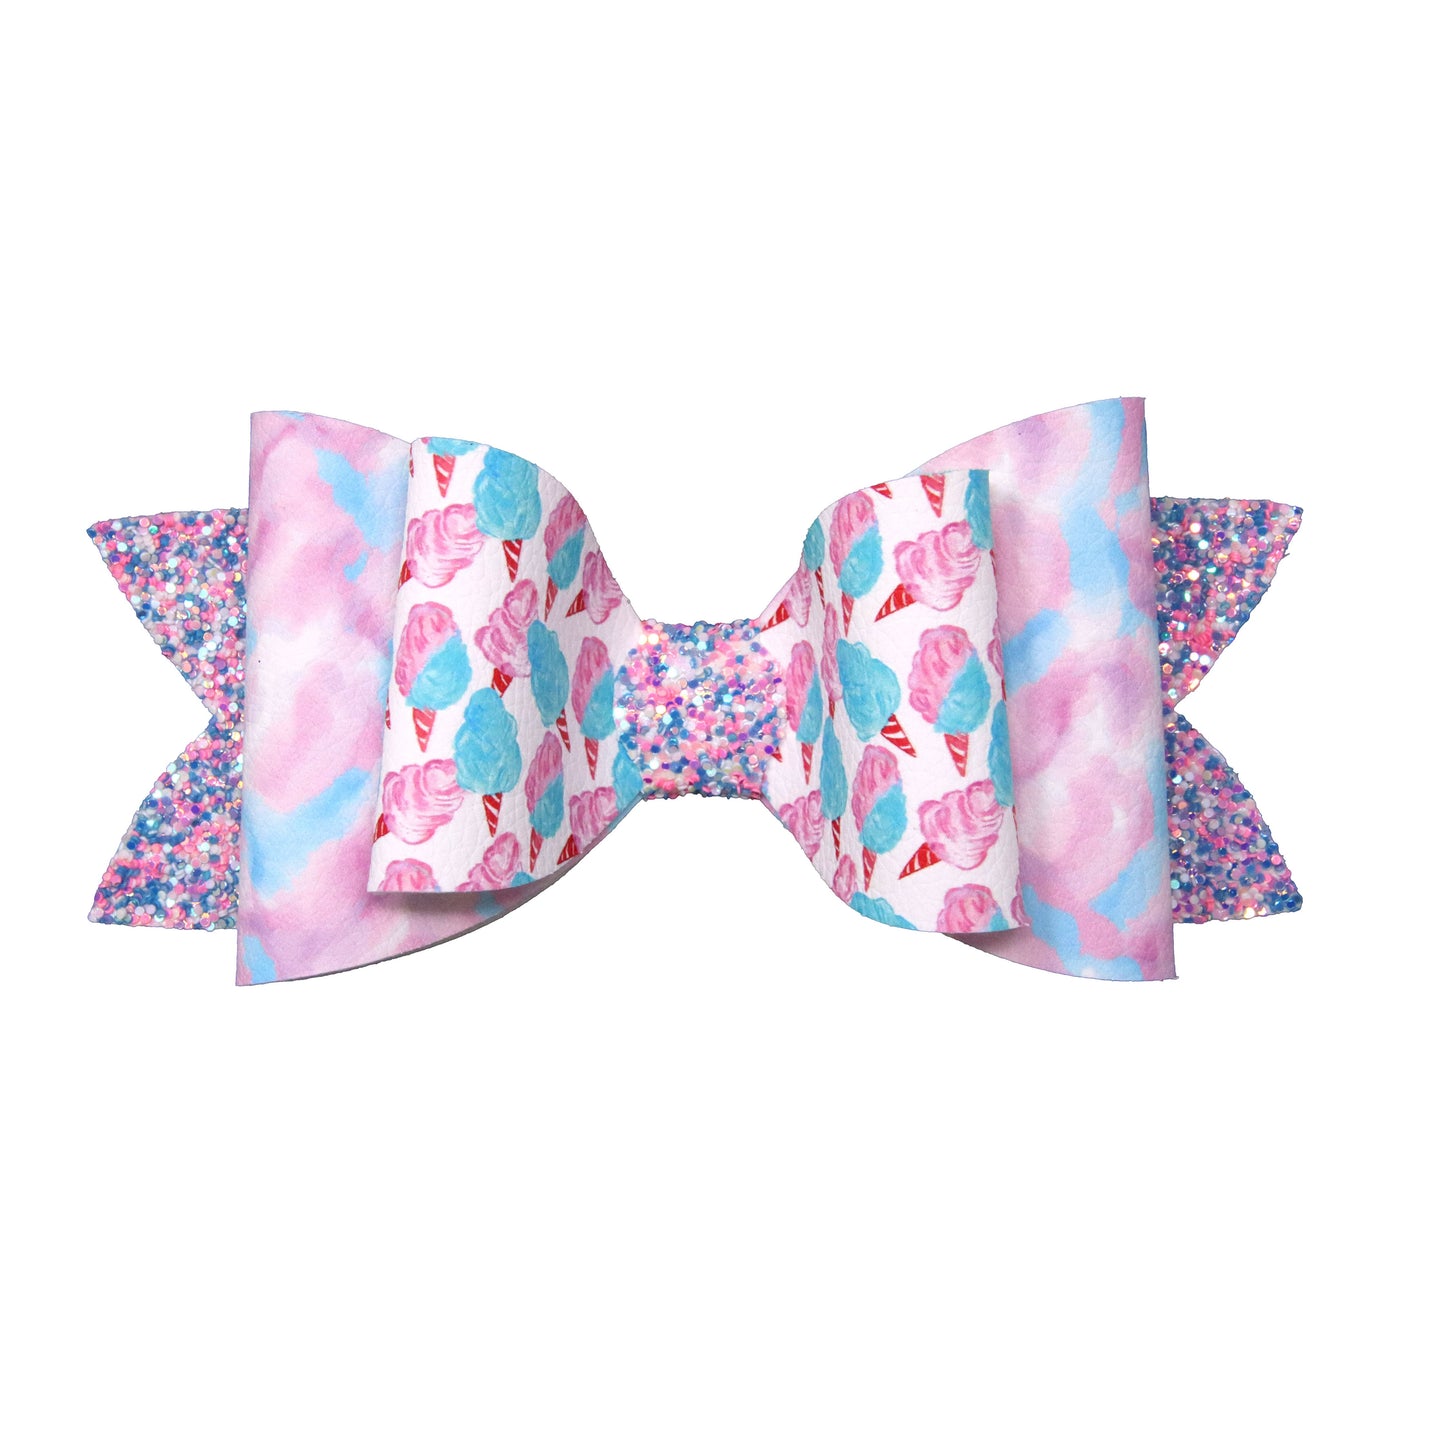 Cotton Candy Twice as Nice Bow 6"